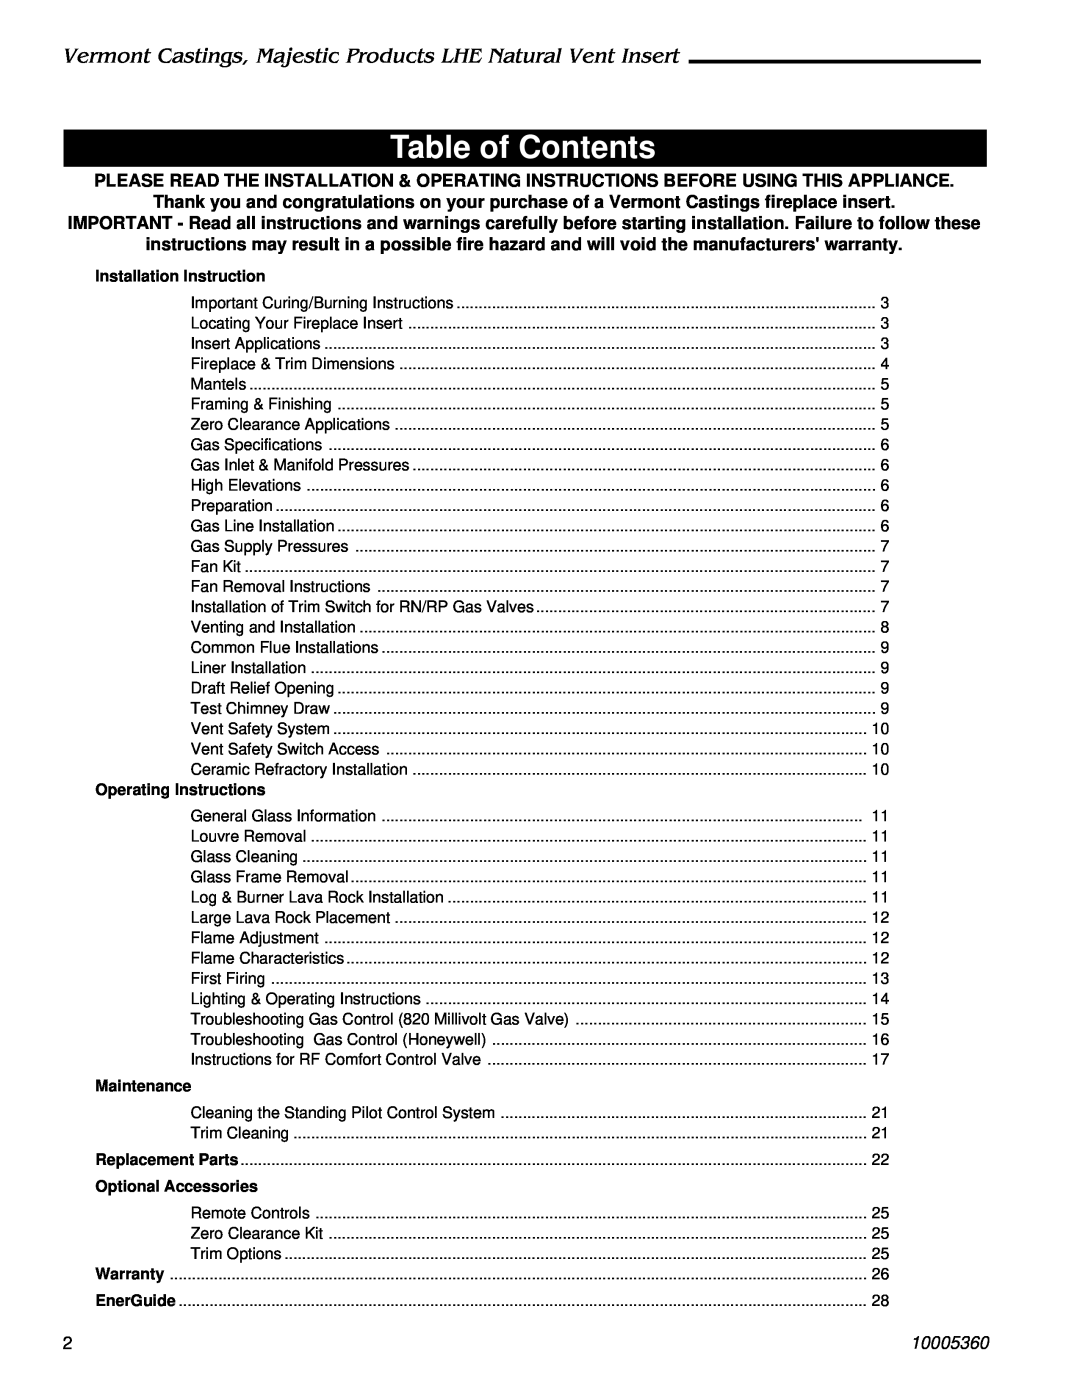 Vermont Casting LHEC20, LHEC30 Table of Contents, 10005360, Installation Instruction, Operating Instructions, Maintenance 